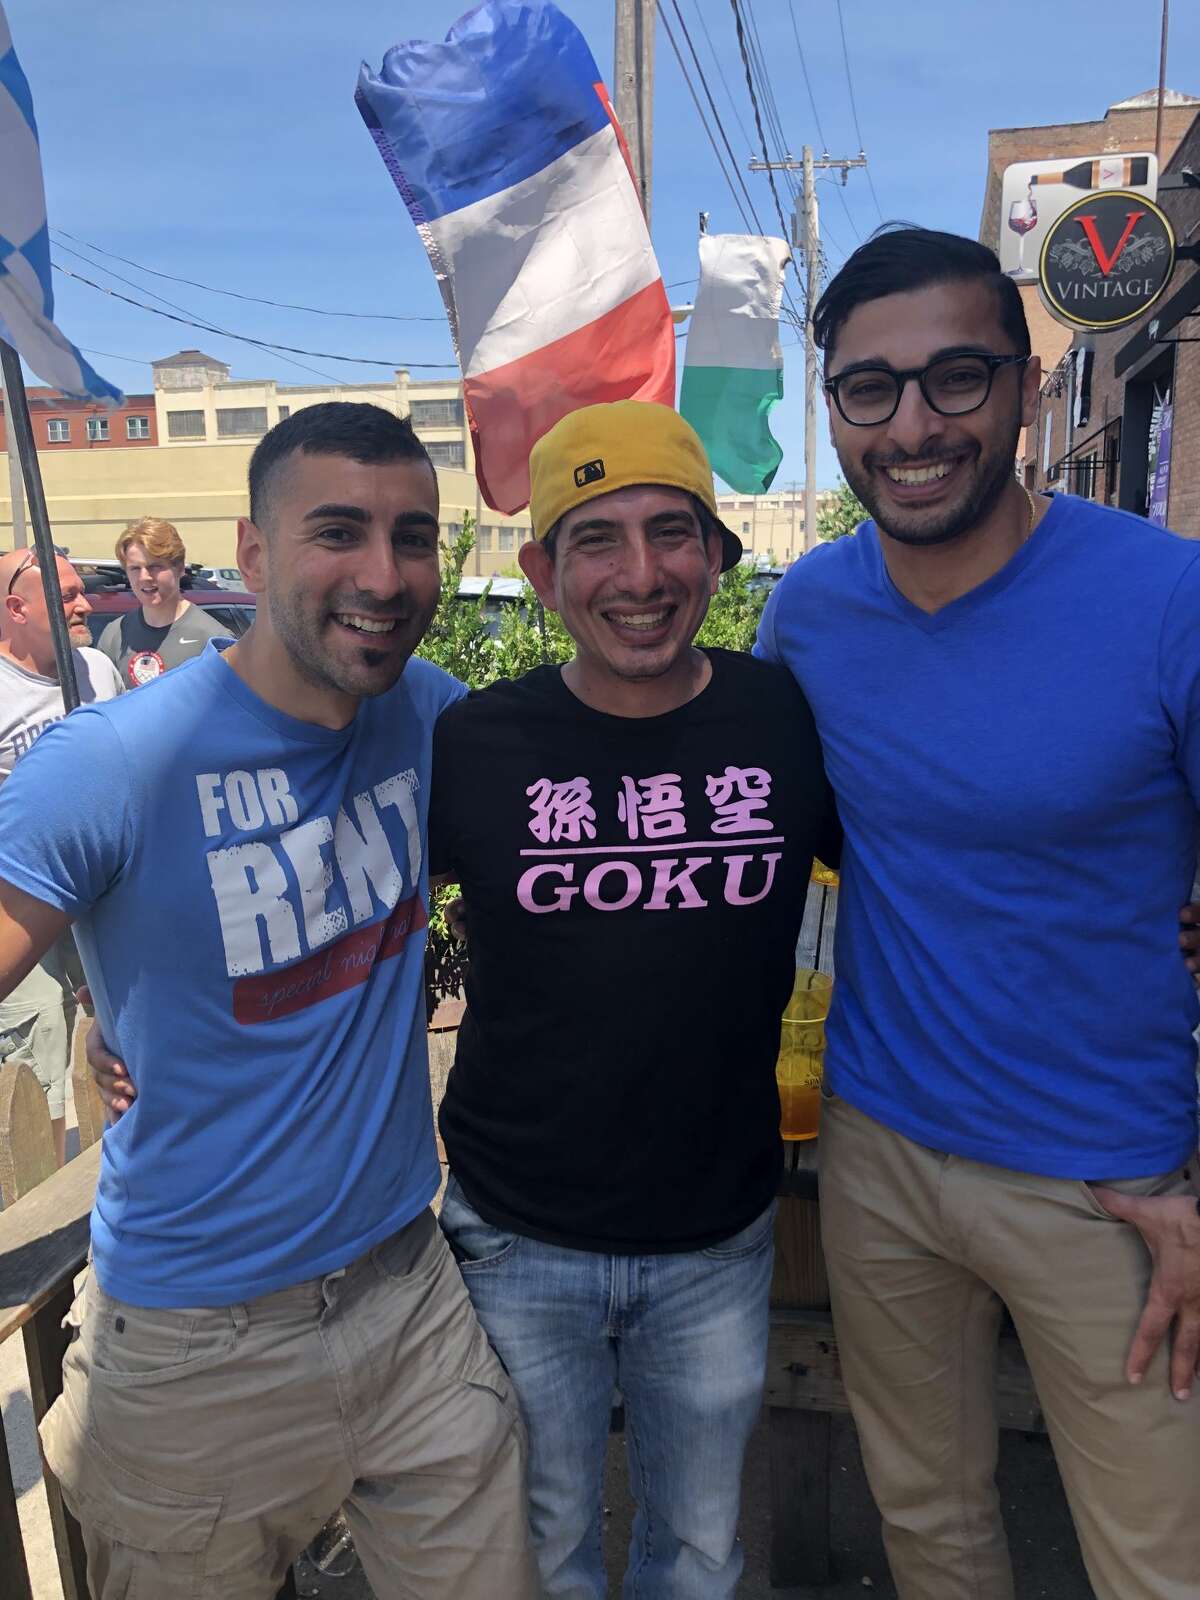 Were you Seen at Wolff’s Biergarten for the USA Women’s Soccer World Cup game in Albany on July 7, 2019?